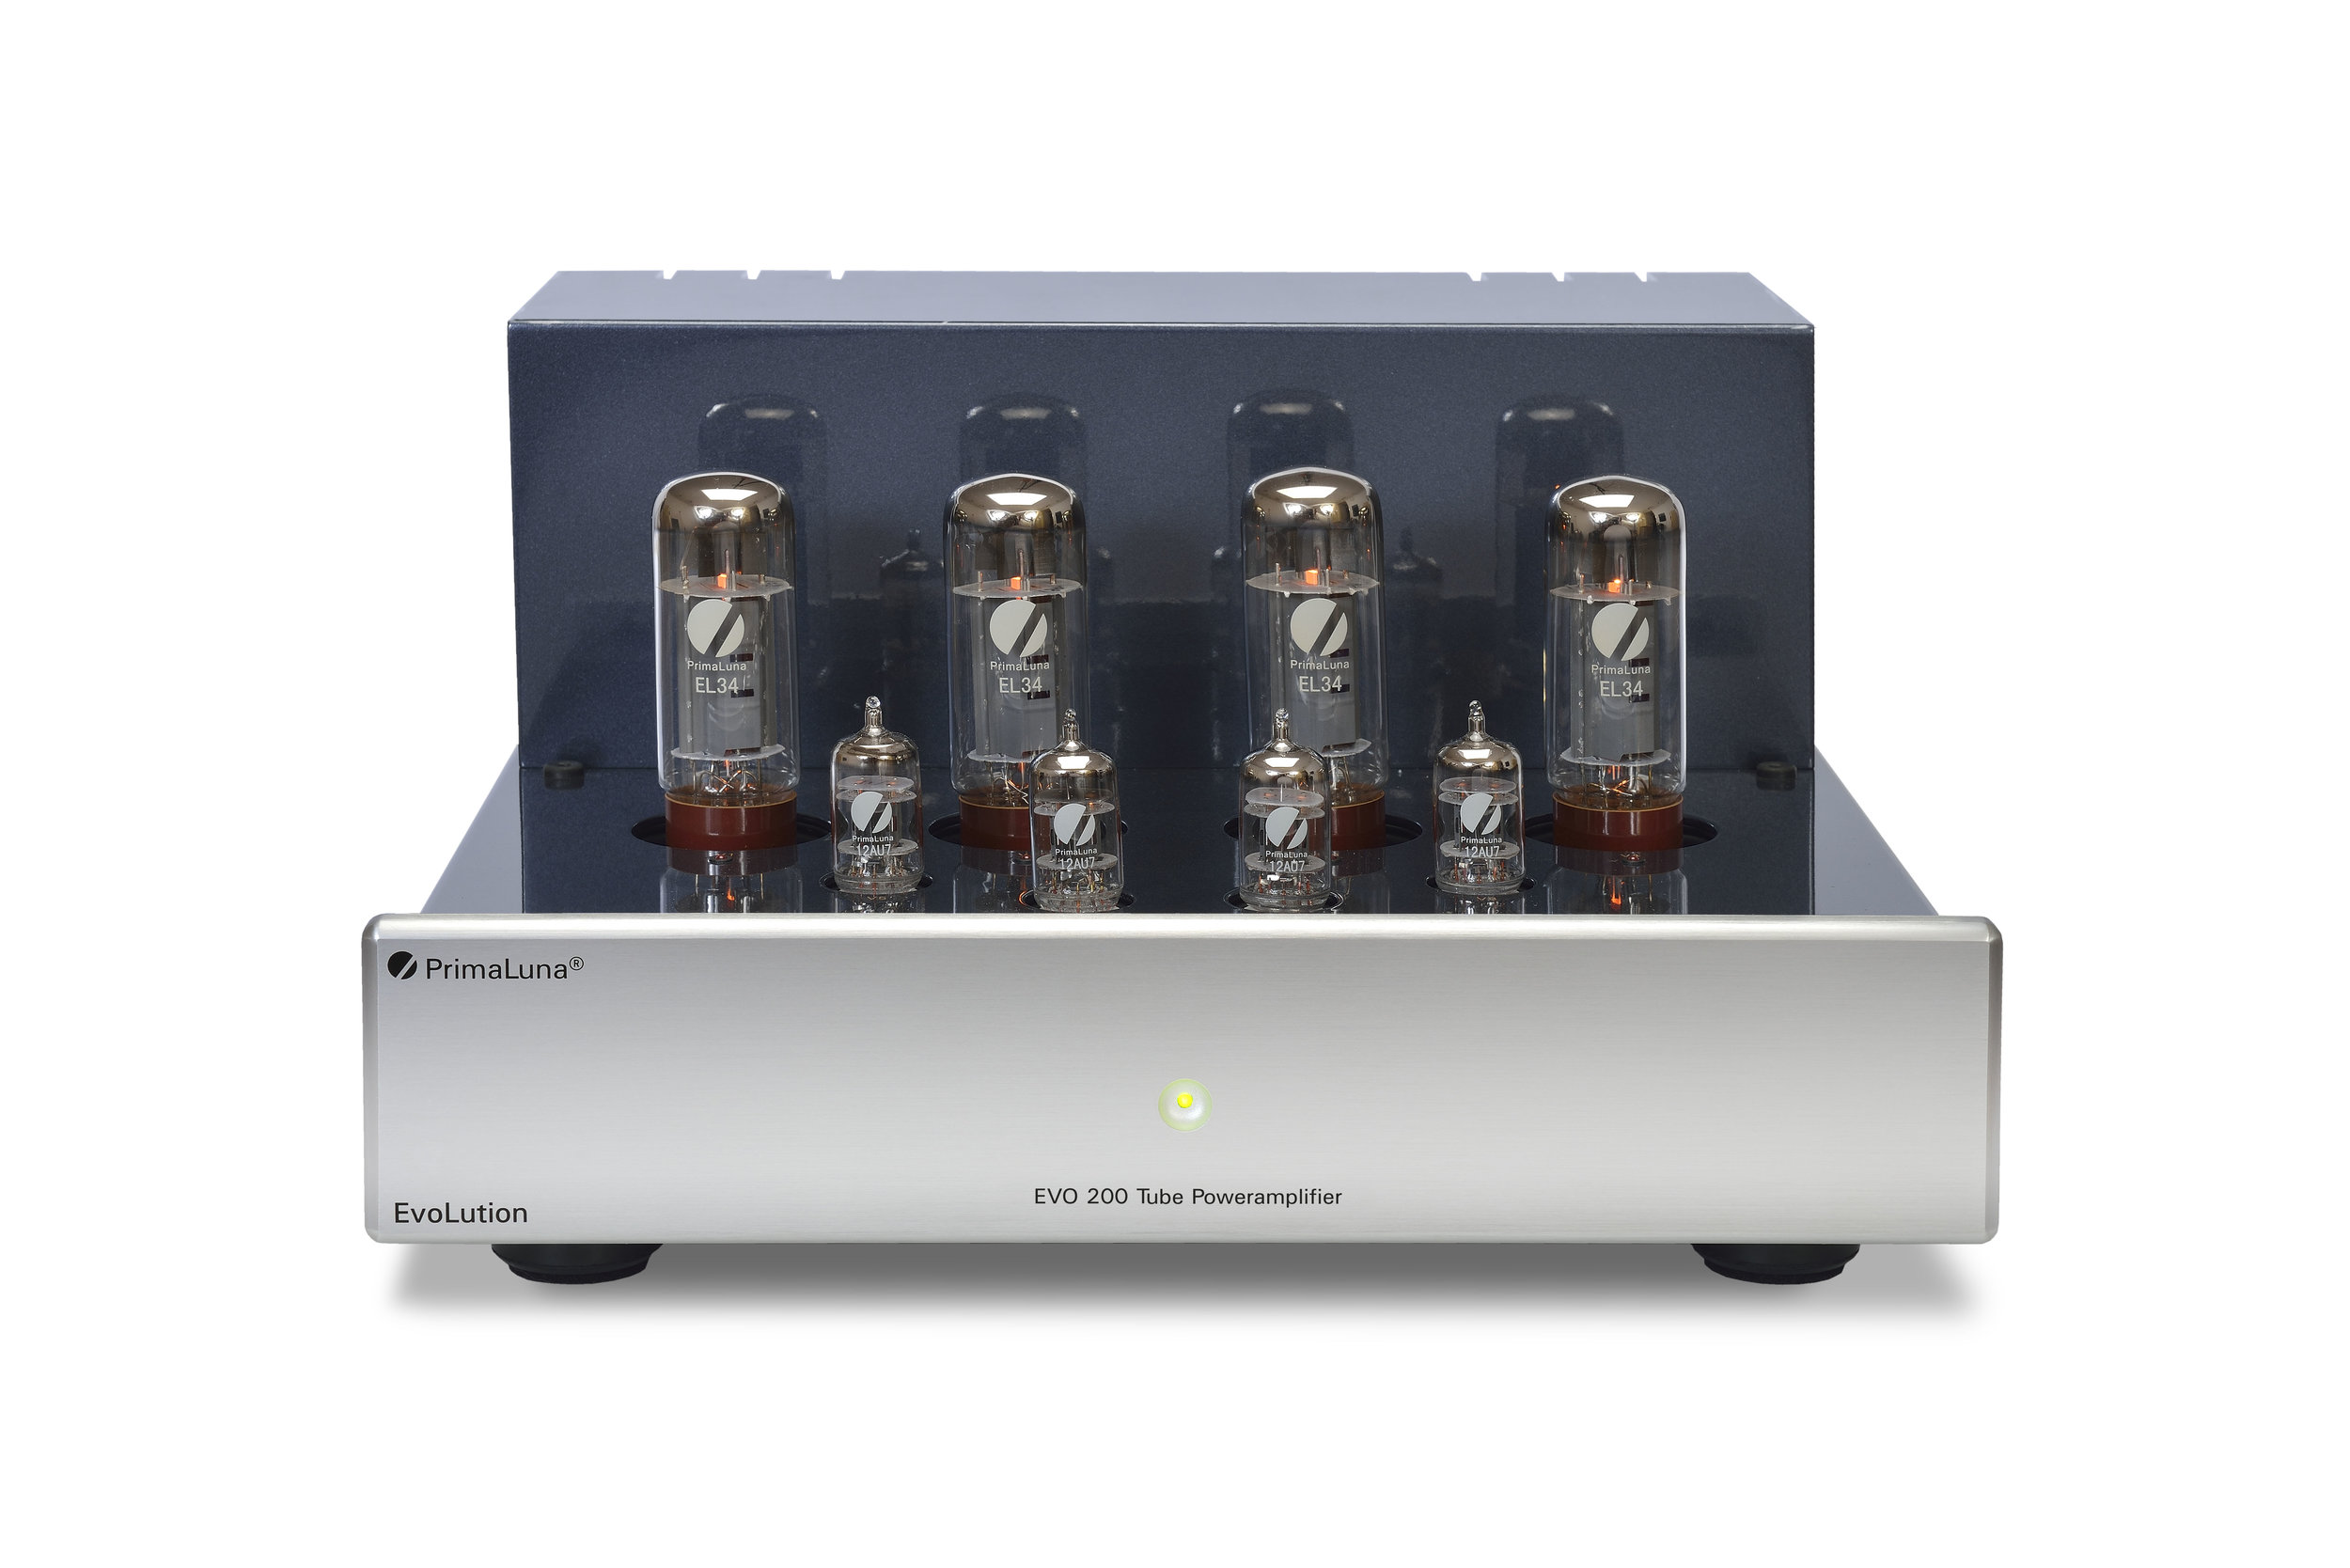 062b - PrimaLuna Evo 200 Tube Poweramplifier - silver - front - without cage - white background.jpg